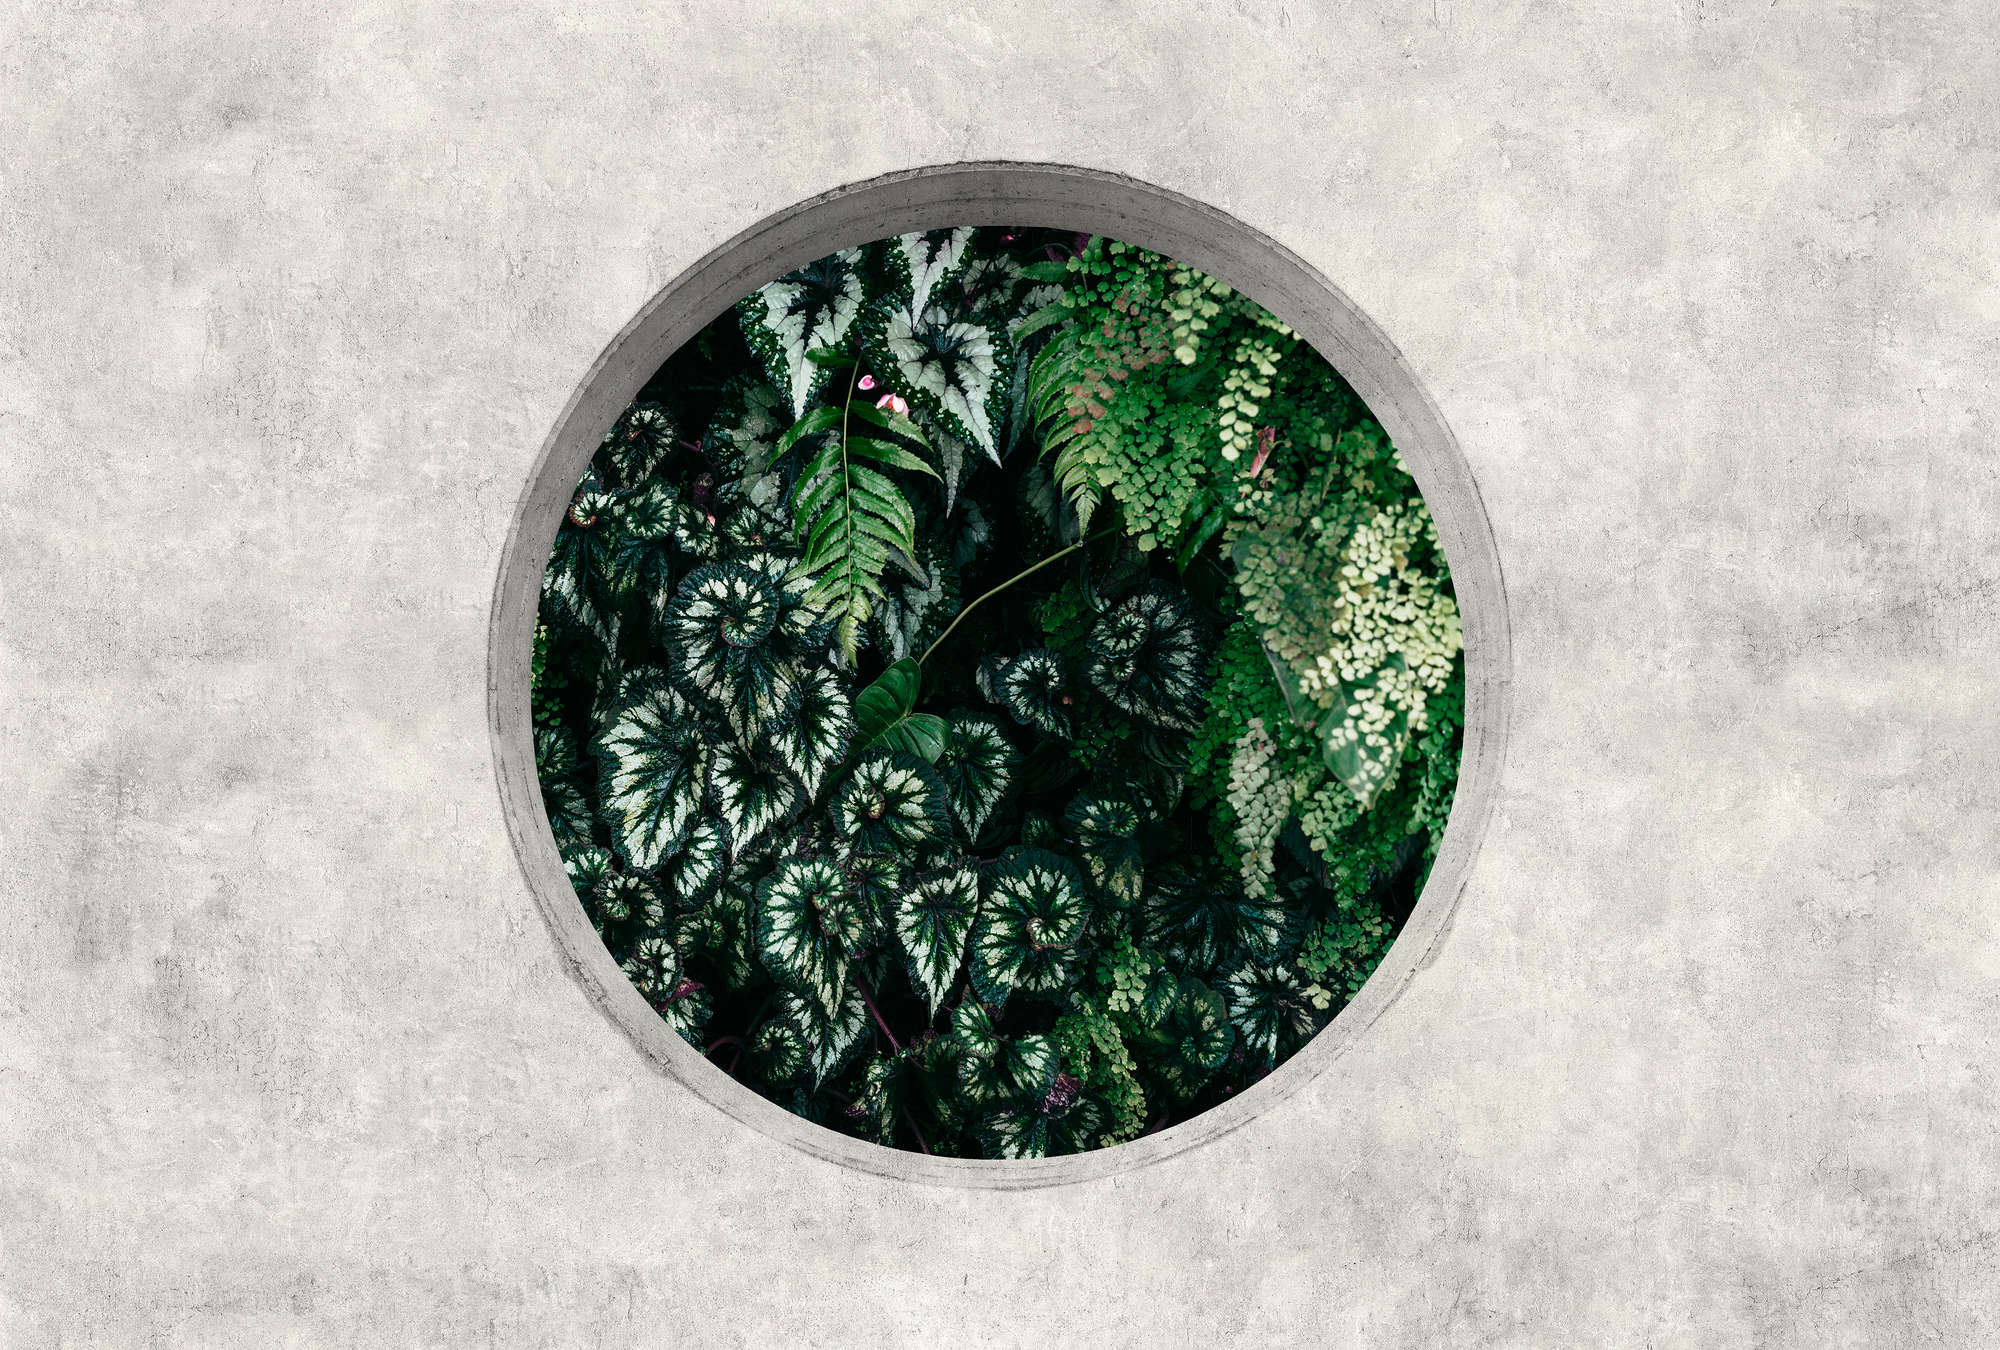             Deep Green 1 - wall mural window round with jungle plants
        